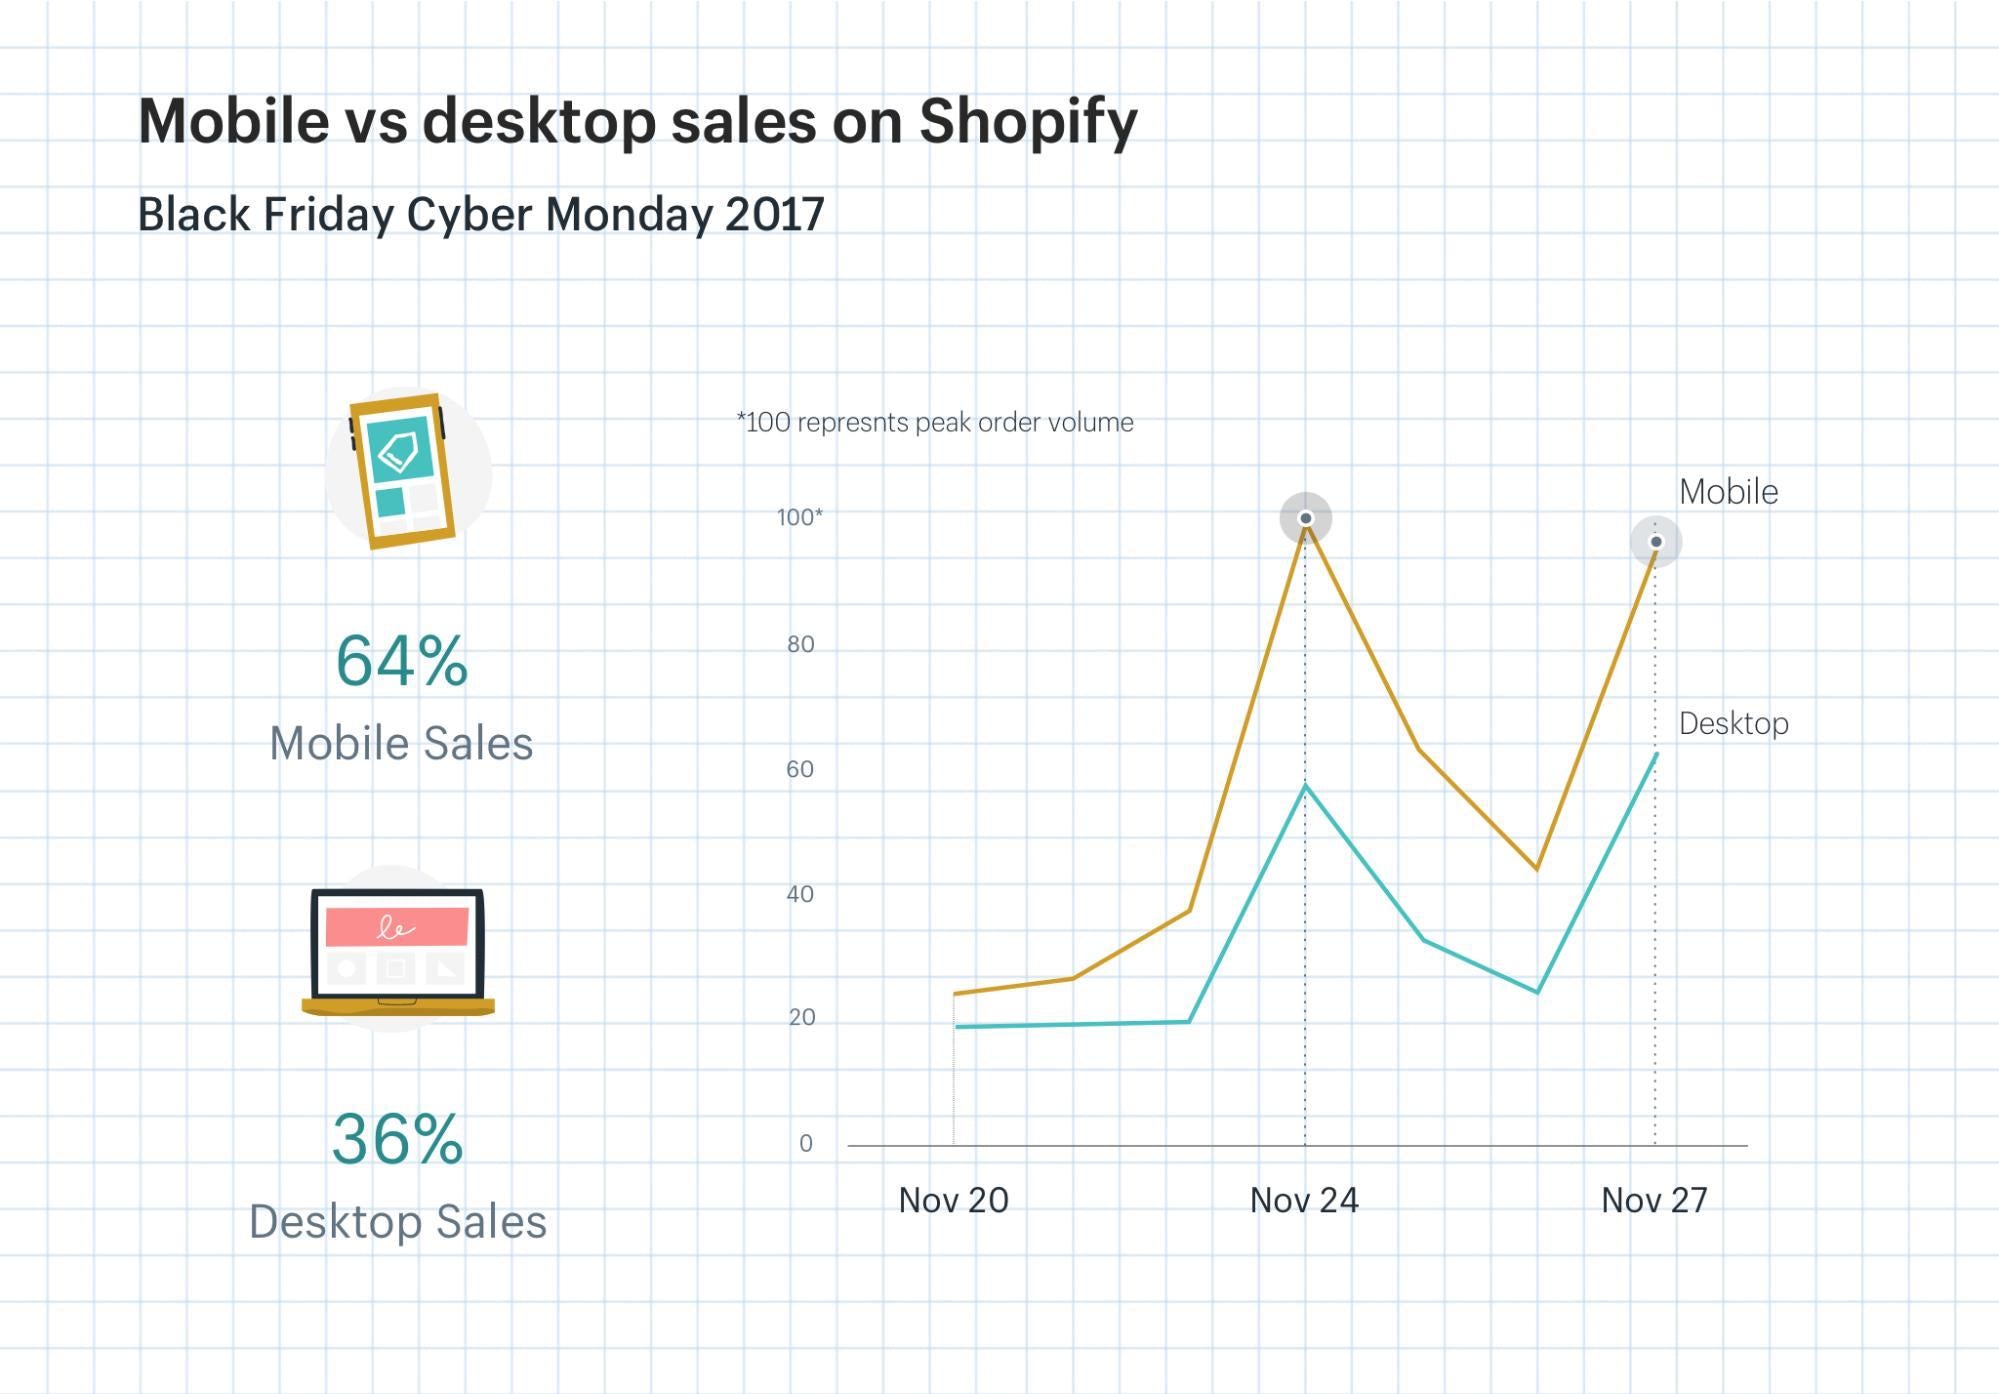 Back to school and Black Friday are both dominated by mobile commerce